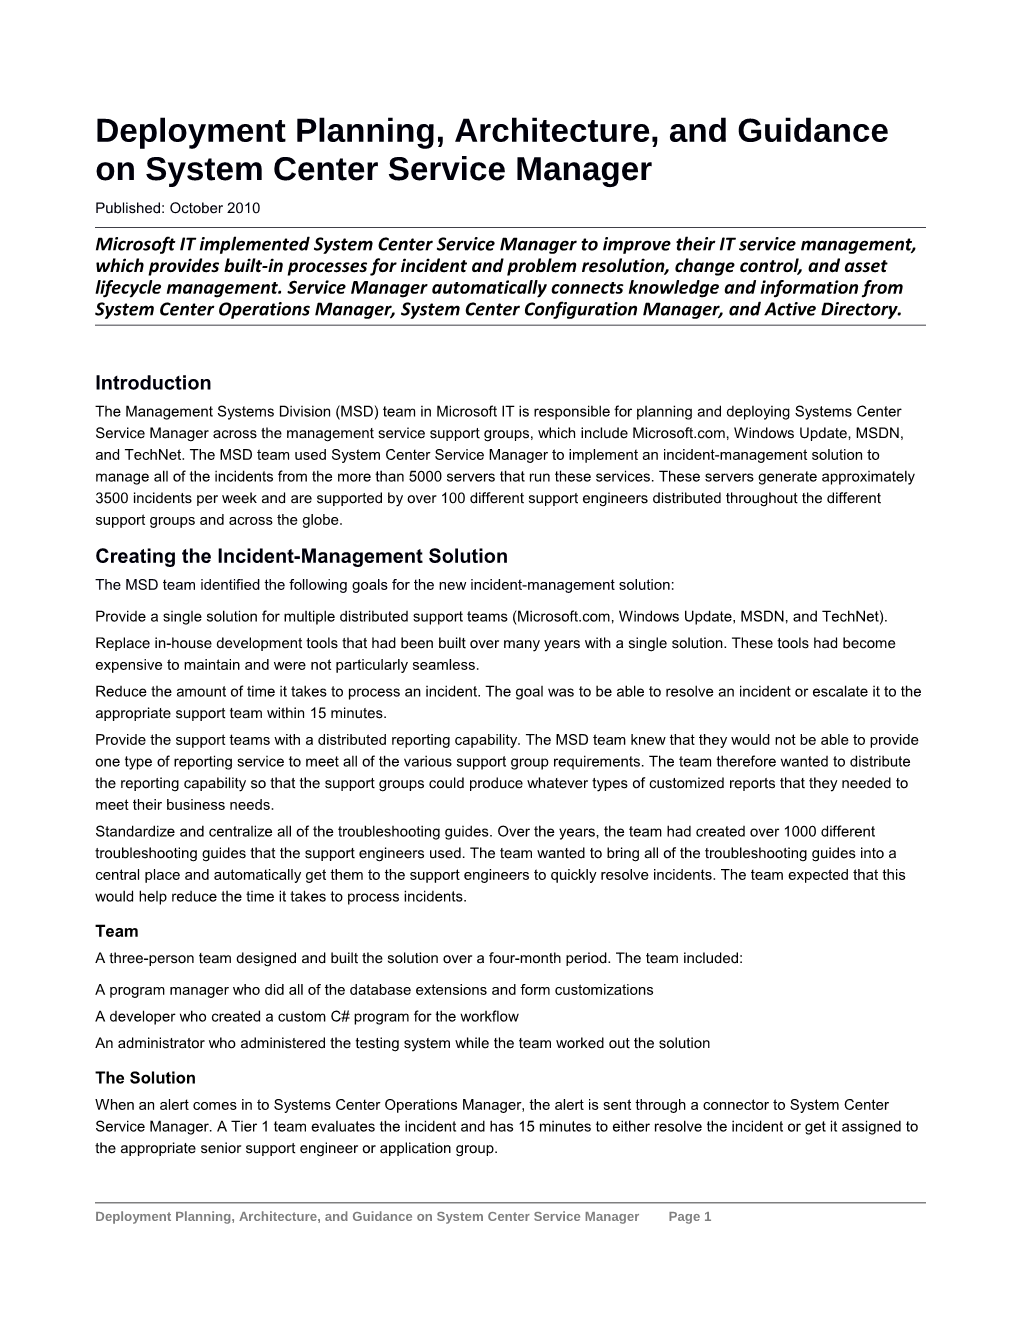 IT Showcase: Deployment Planning, Architecture, and Guidance on System Center Service Manager